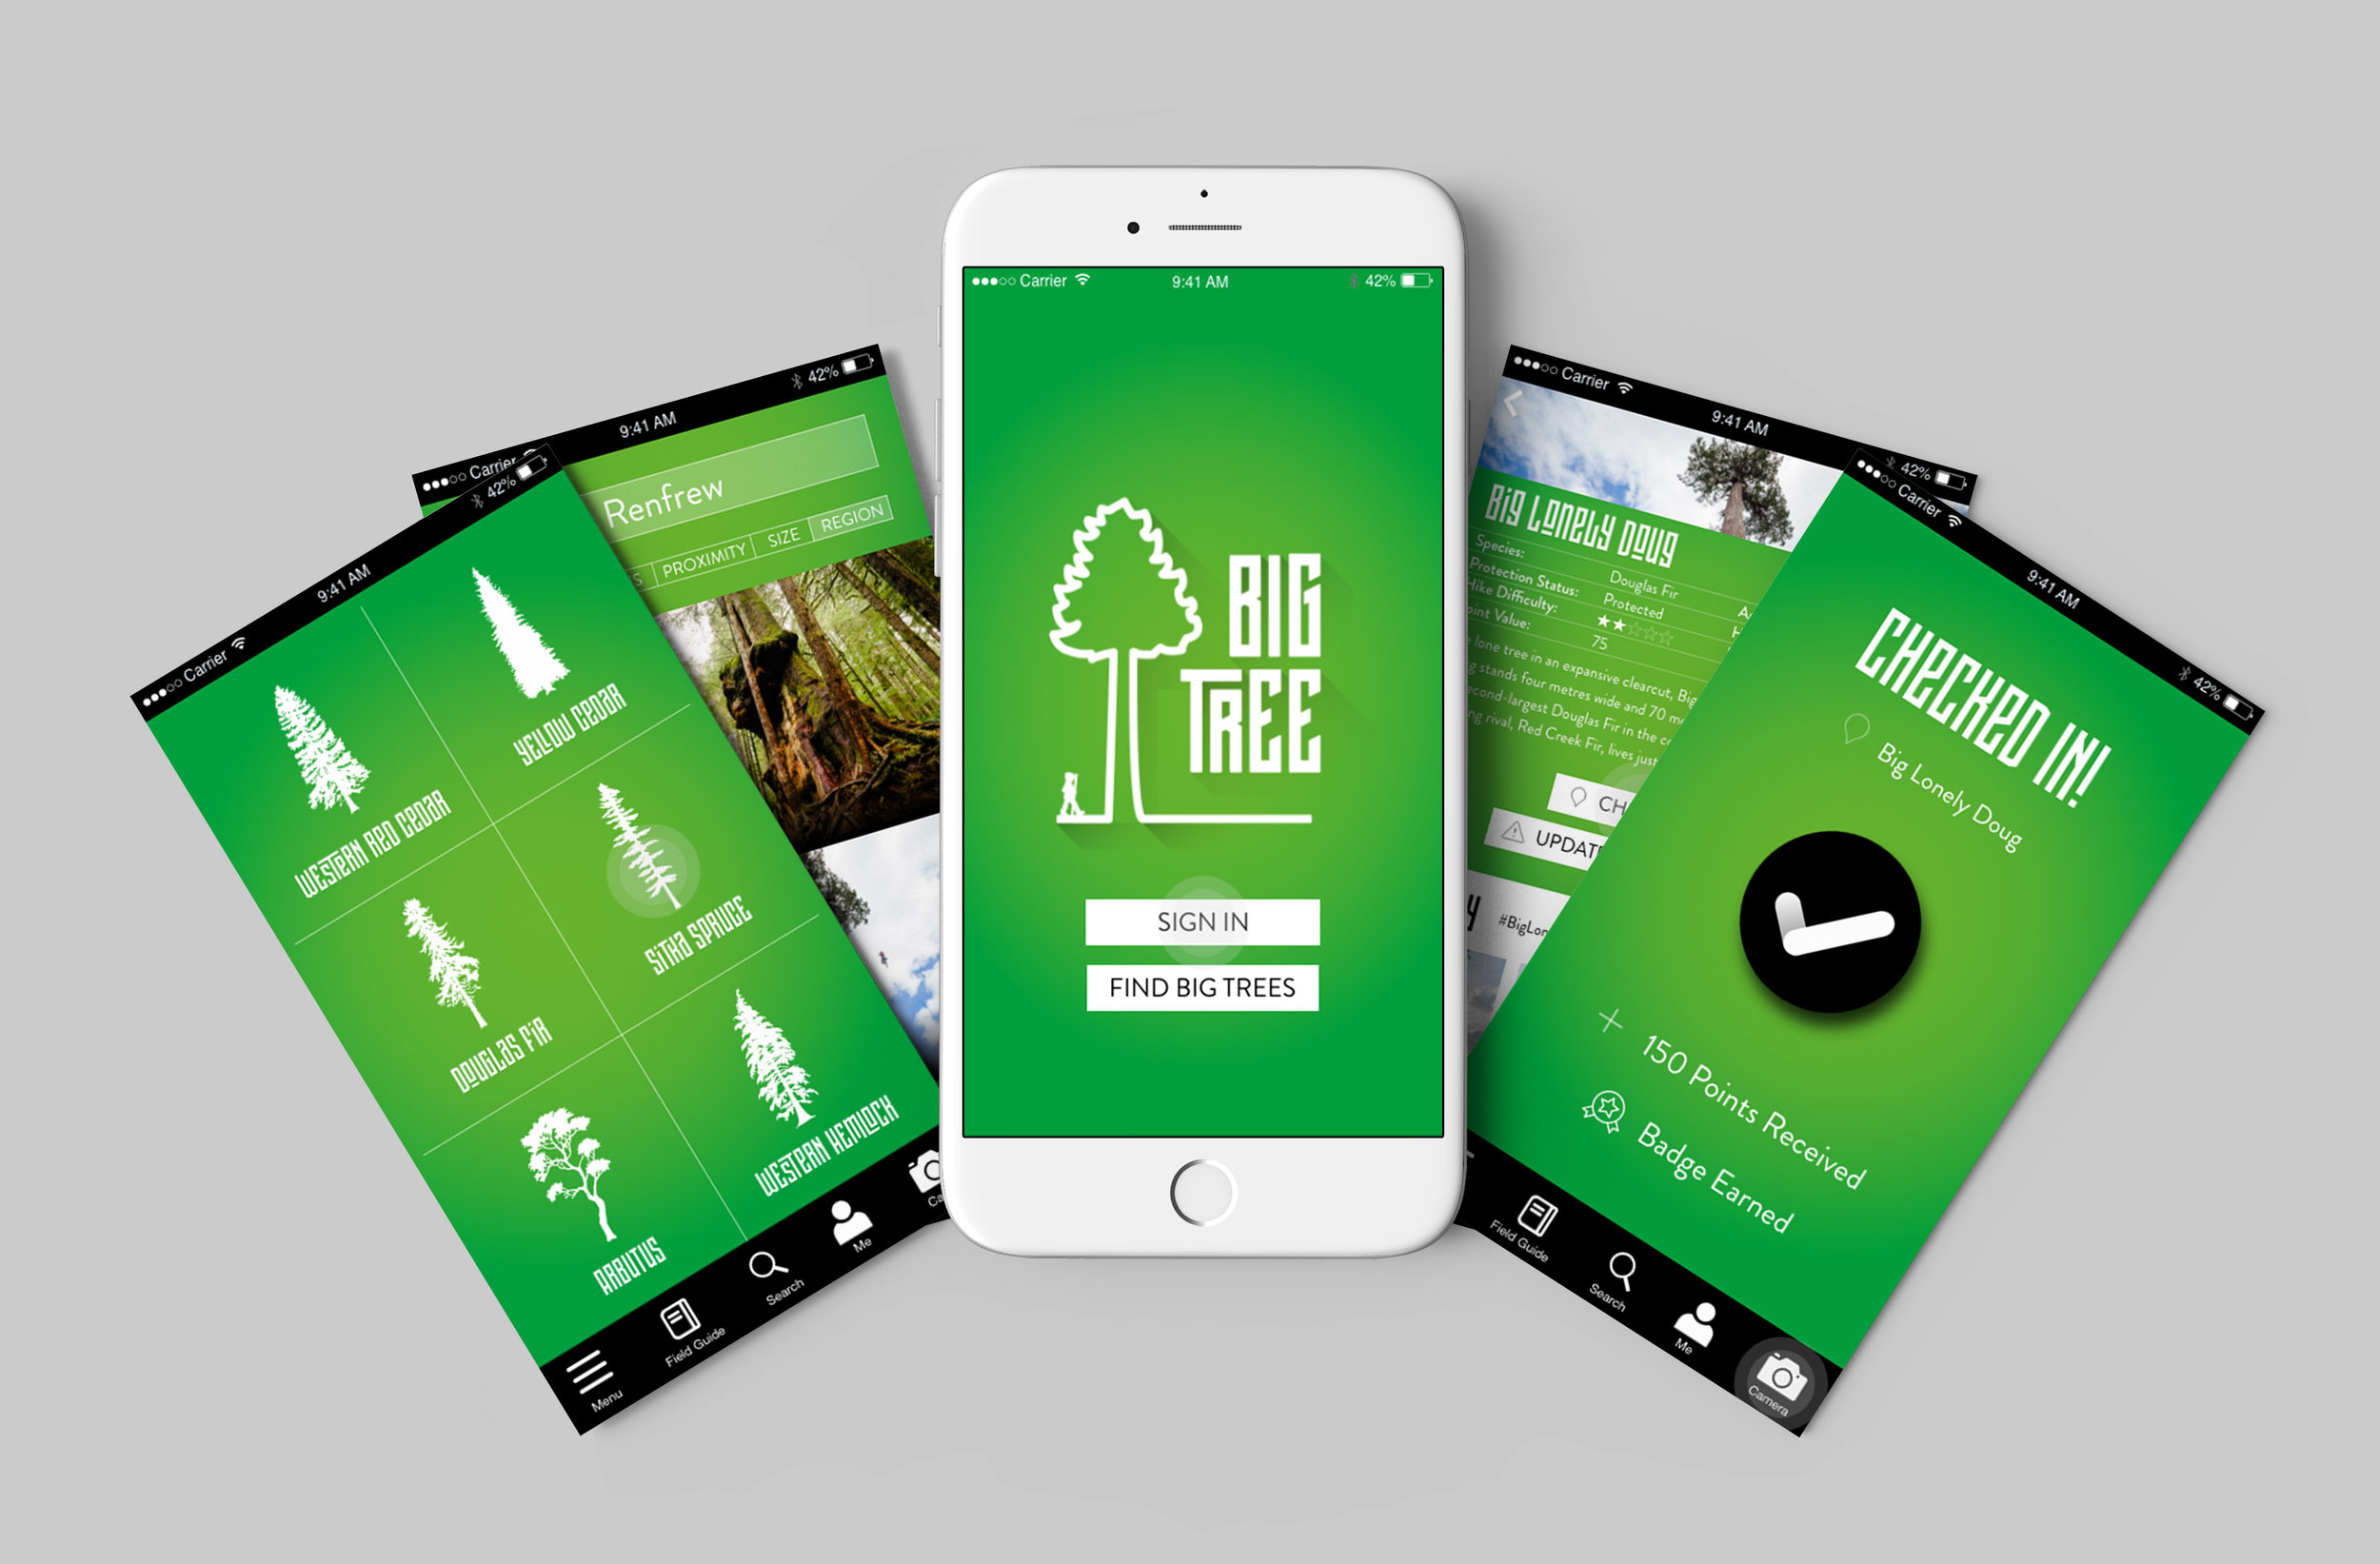  Robazzo provided a full design package for the Big Tree App, from logo, typeface and colour scheme to user interface and wireframes. 